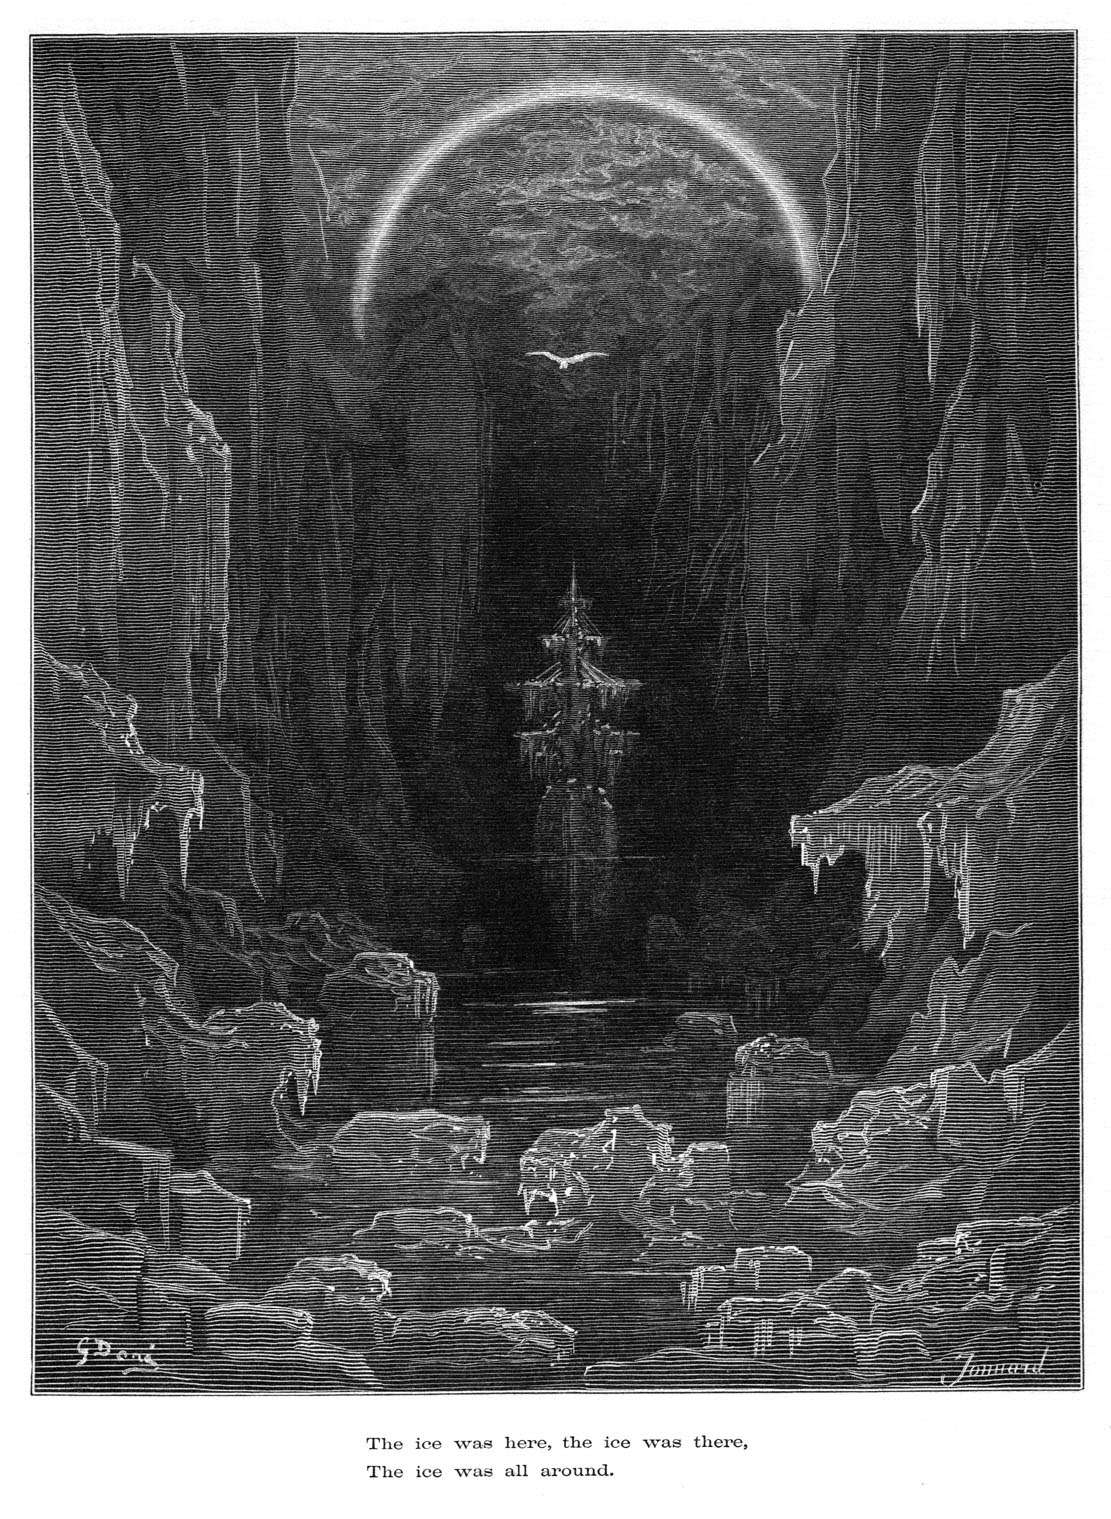 The Art of Pierangelo Boog: Gustave Doré - *The Rime of the Ancient ...